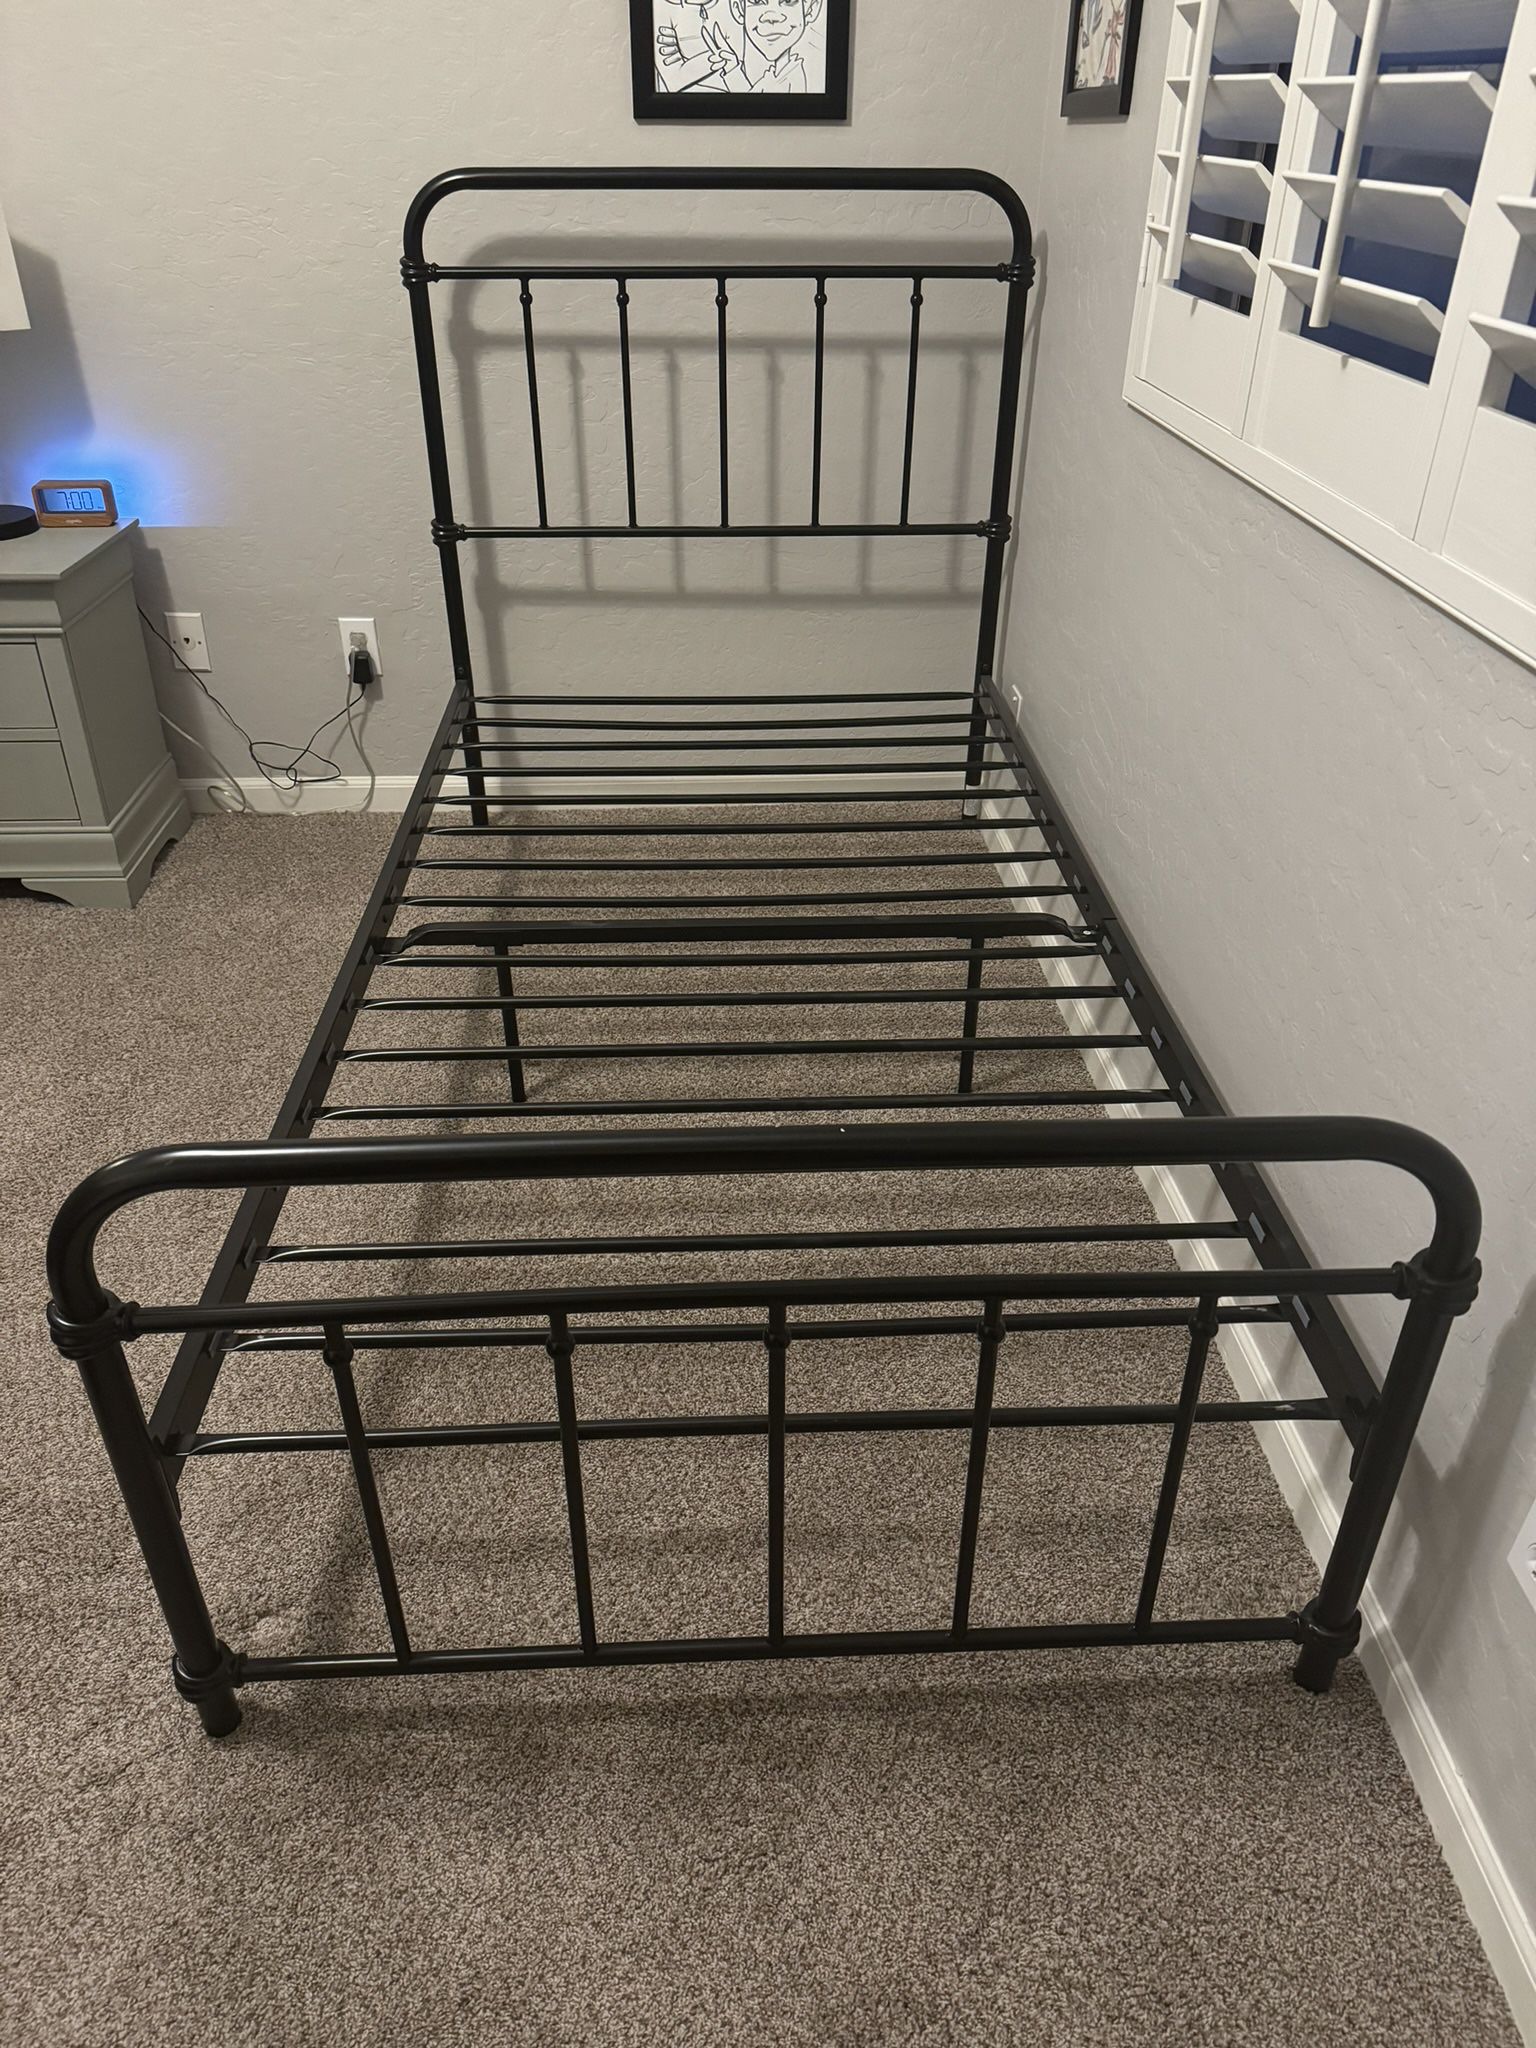 Twin Metal Bed Set. Includes Mattress/Boxspring and Bedding